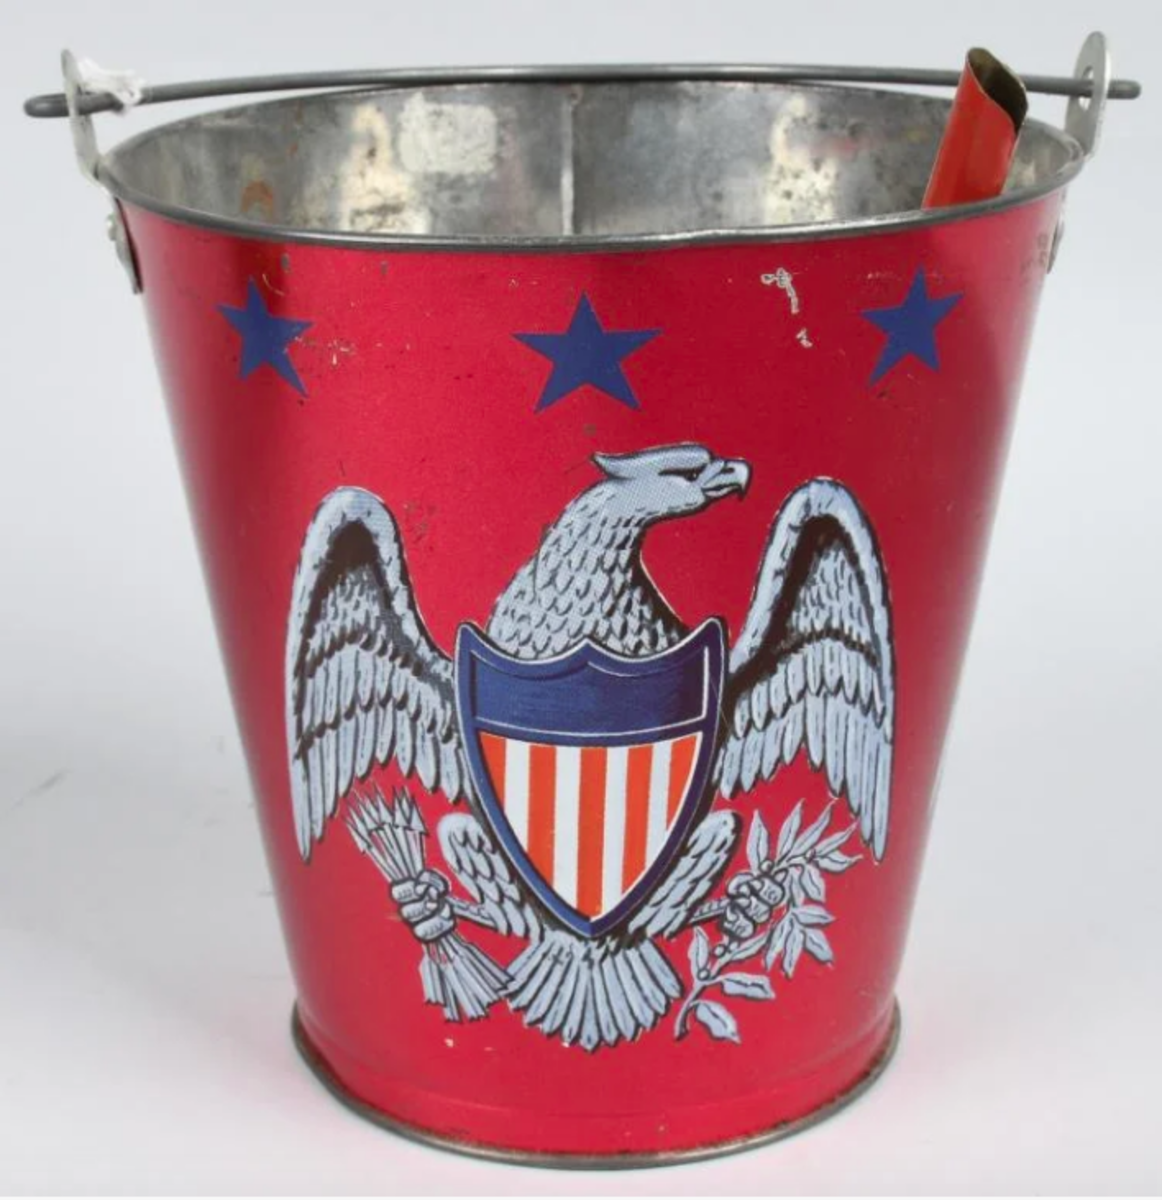 A patriotic-themed pail of a bald eagle with shield, 6” h. This was sold in a lot of two (the other pail is shown below) for $50.